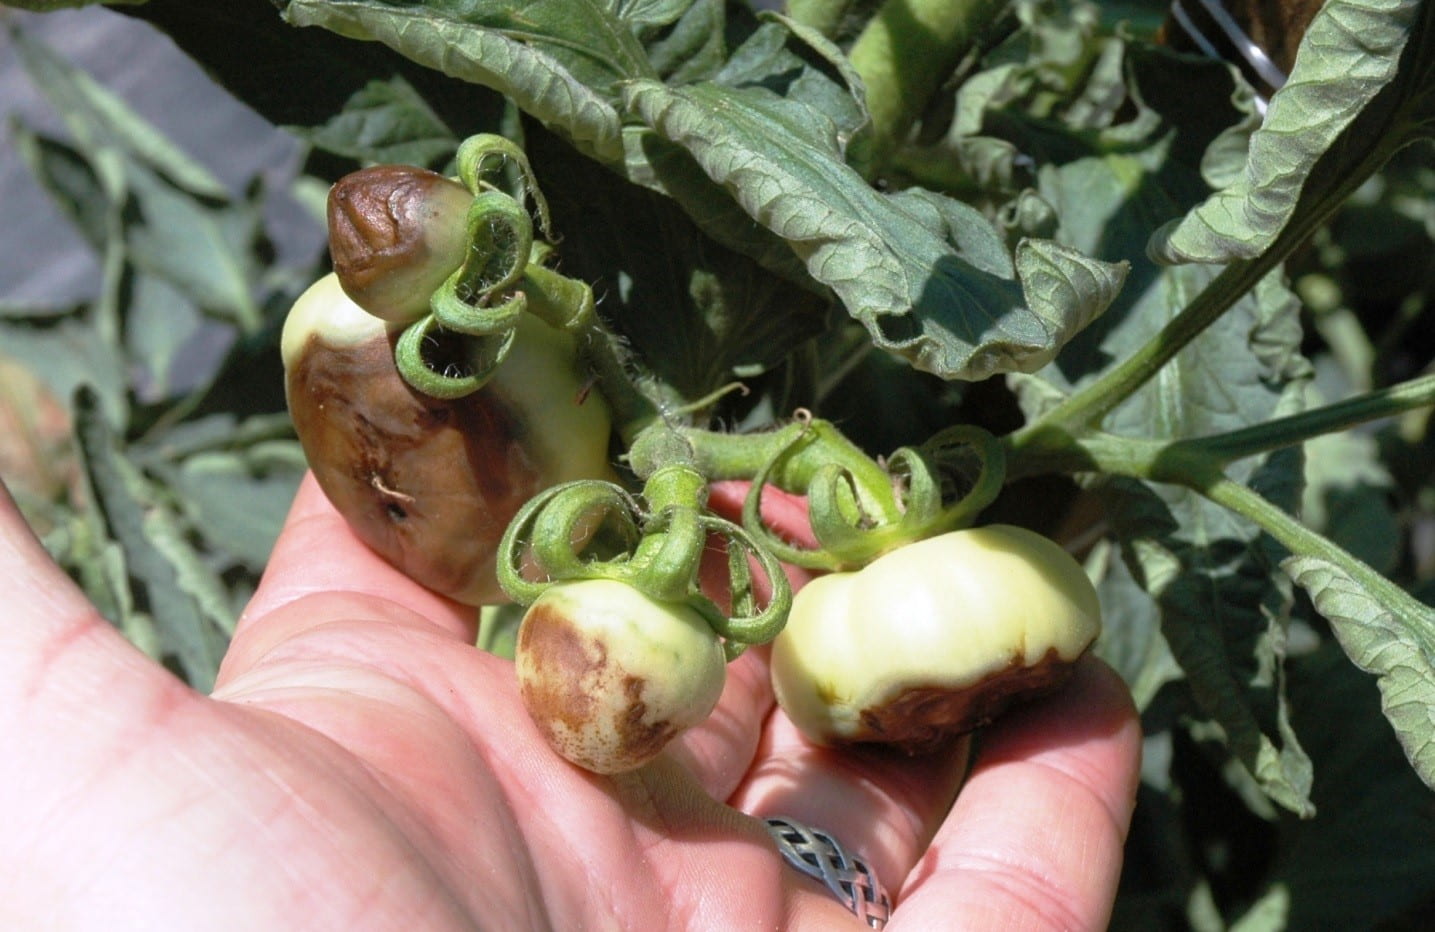 Cluster of green tomatoes with blossom end rot ( browning at the base).